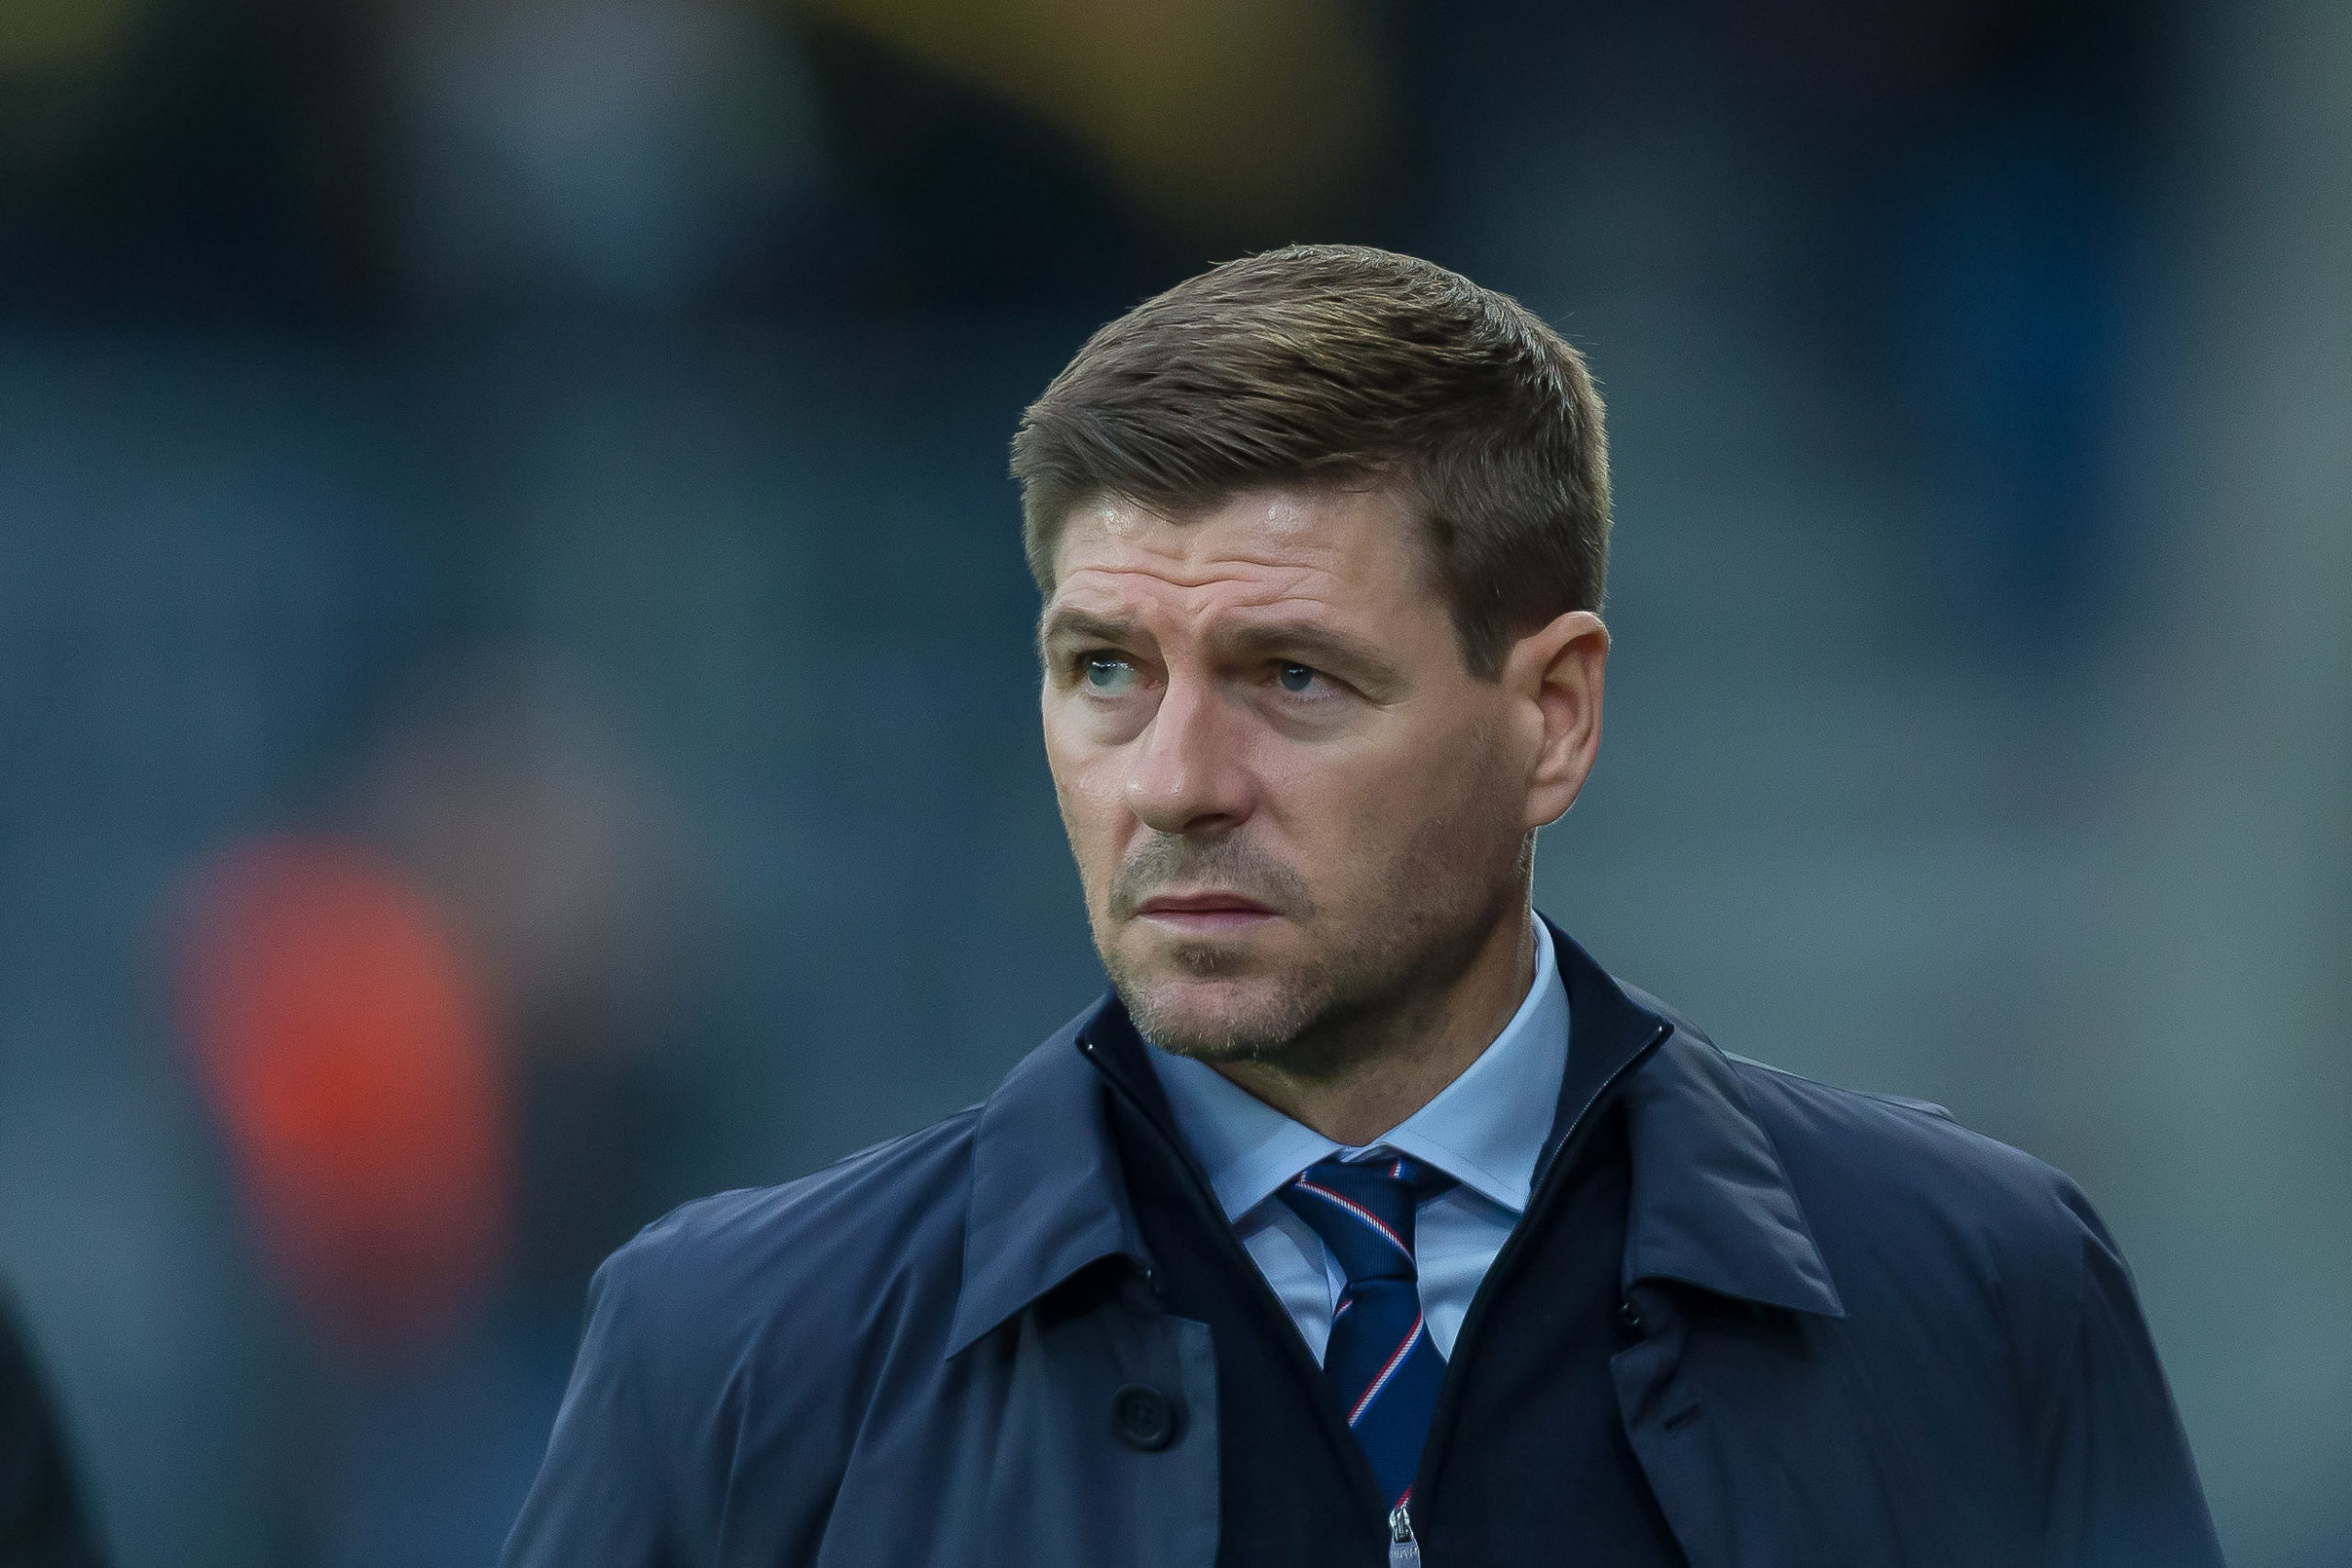 BERN, SWITZERLAND - OCTOBER 03: head coach Steven Gerrard of Rangers FC looks on prior to the UEFA Europa League group G match between BSC Young Boys and Rangers FC at Stade de Suisse, Wankdorf on October 3, 2019 in Bern, Switzerland.